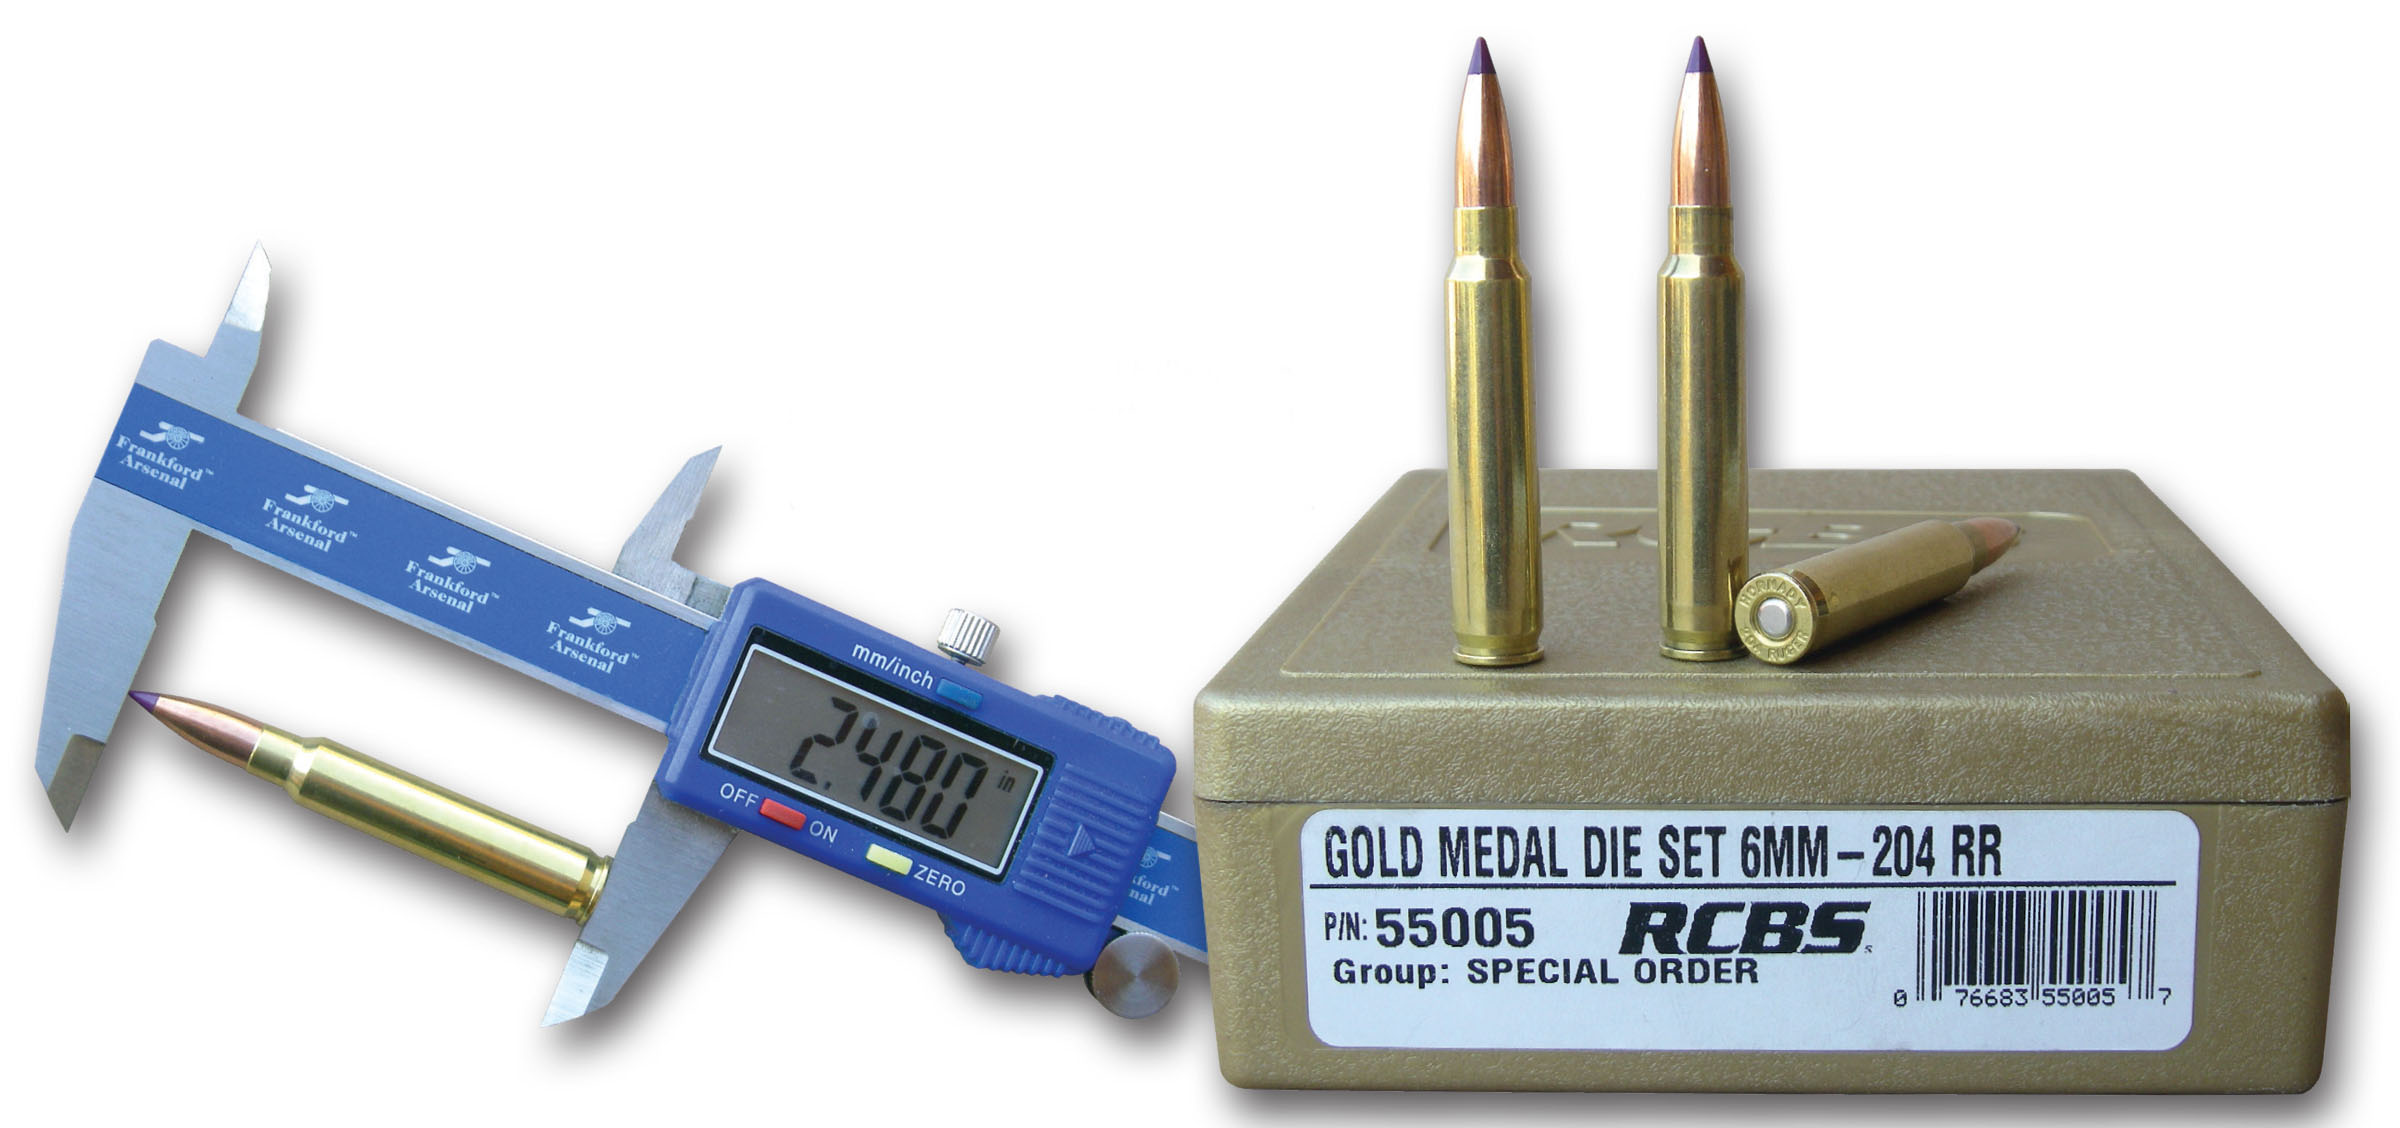 In the 6mm-204 RR, most bullets were seated with an overall cartridge length of around 2.480 inches, necessitating using the rifle and pistol as single shots.